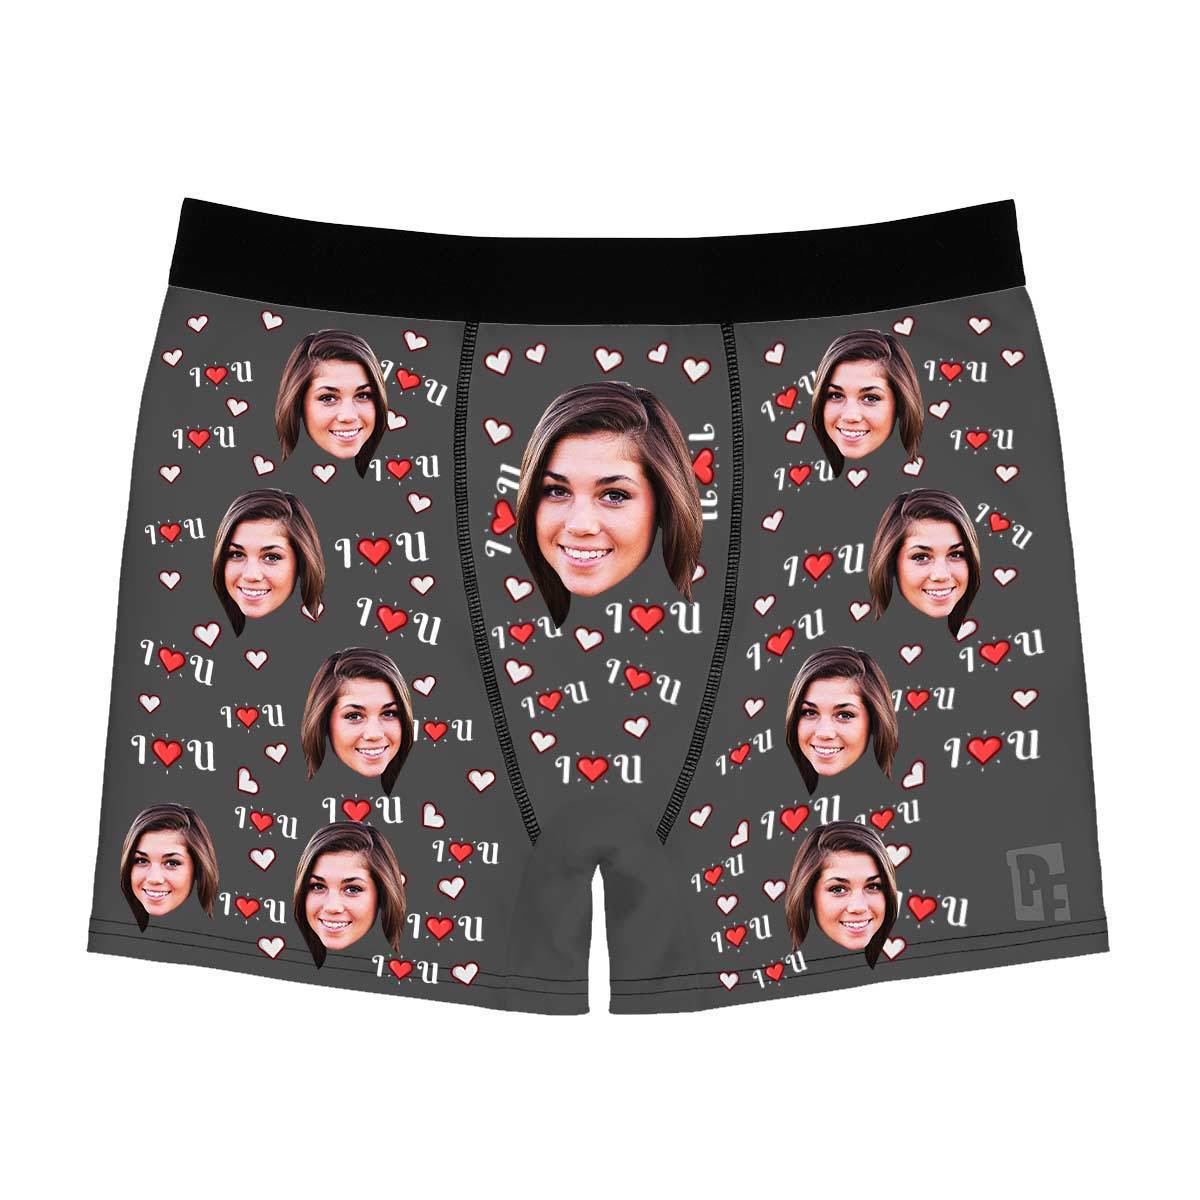 Dark I <3 You men's boxer briefs personalized with photo printed on them